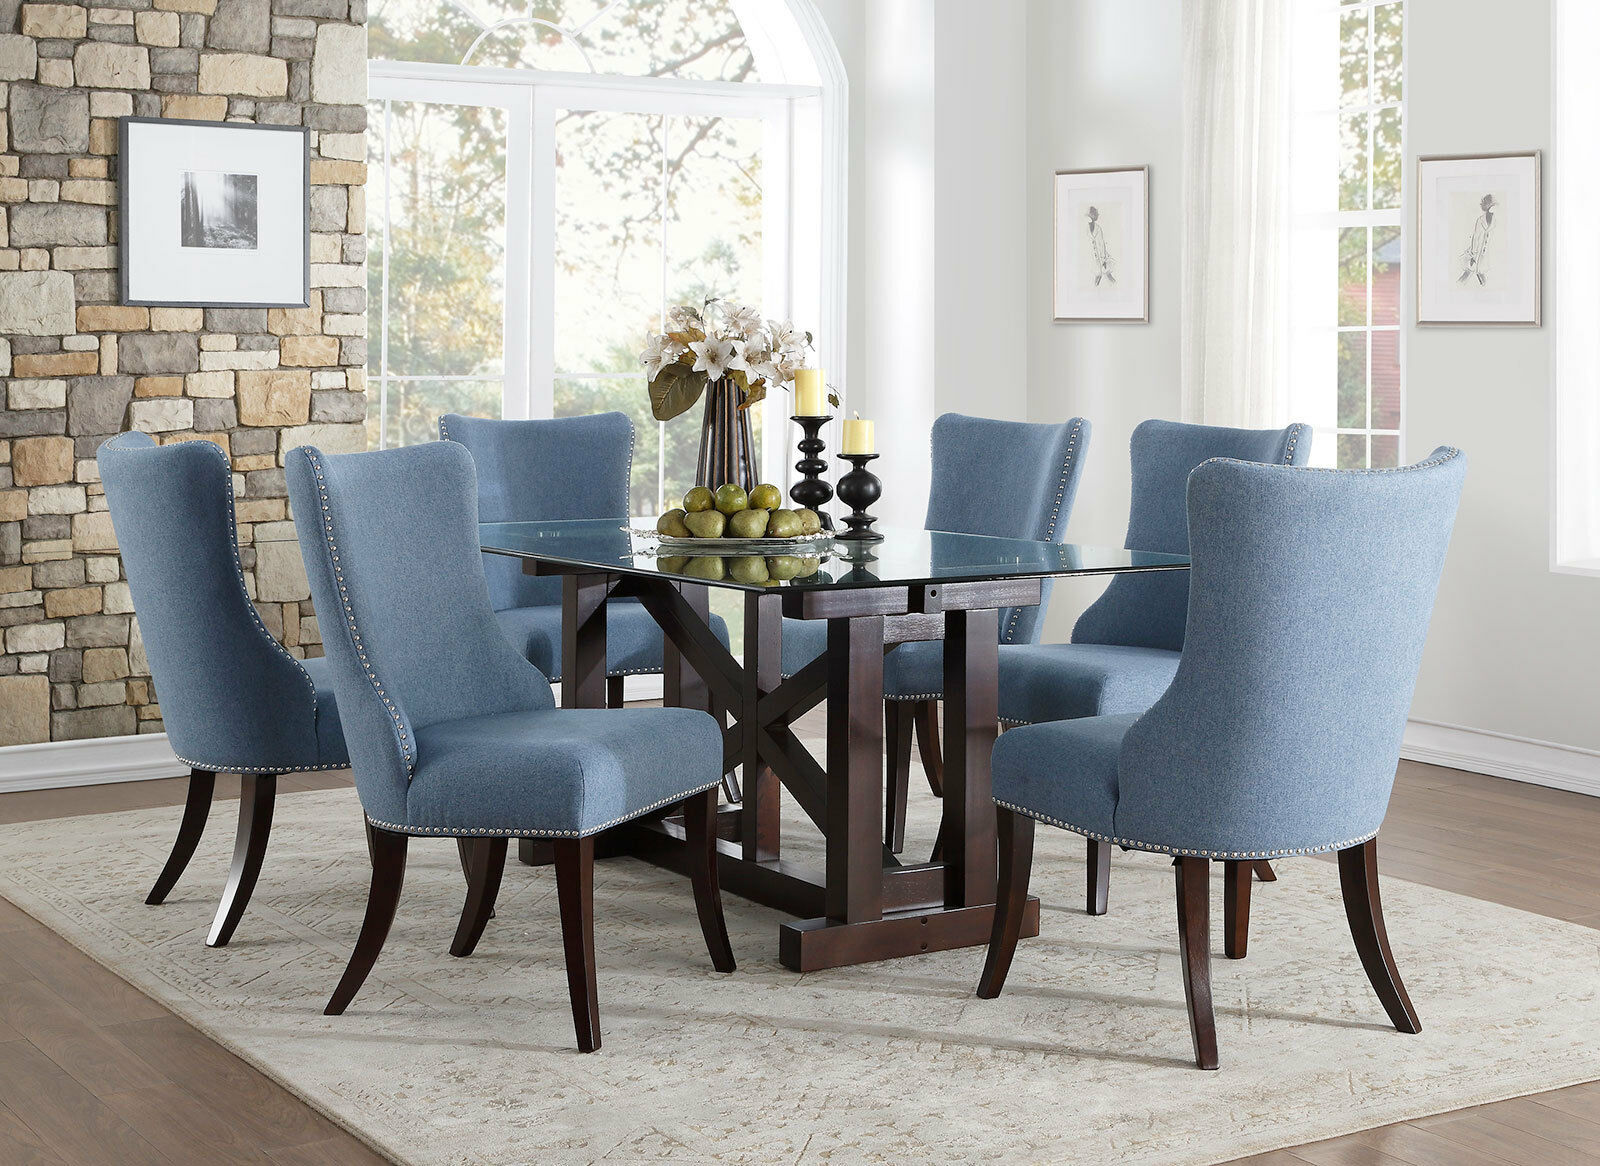 NEW Transitional Dining Room Rectangular Glass Top Table & Blue Chairs